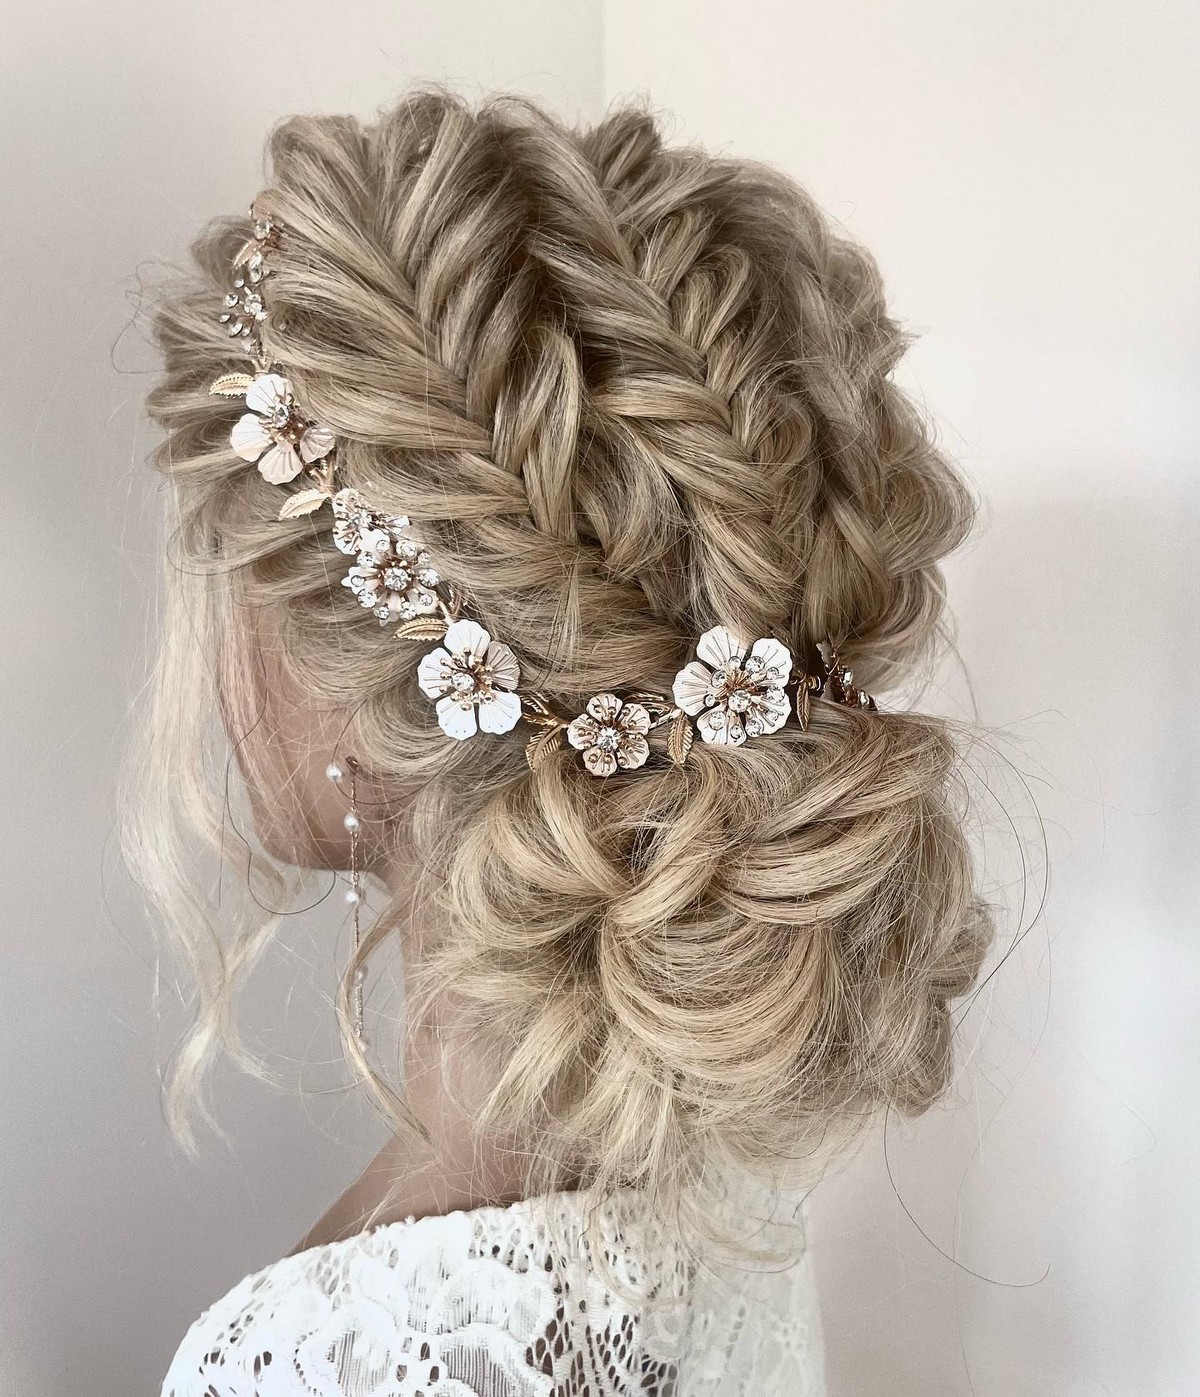 Tucked-In Updo With Floral Hair Vine